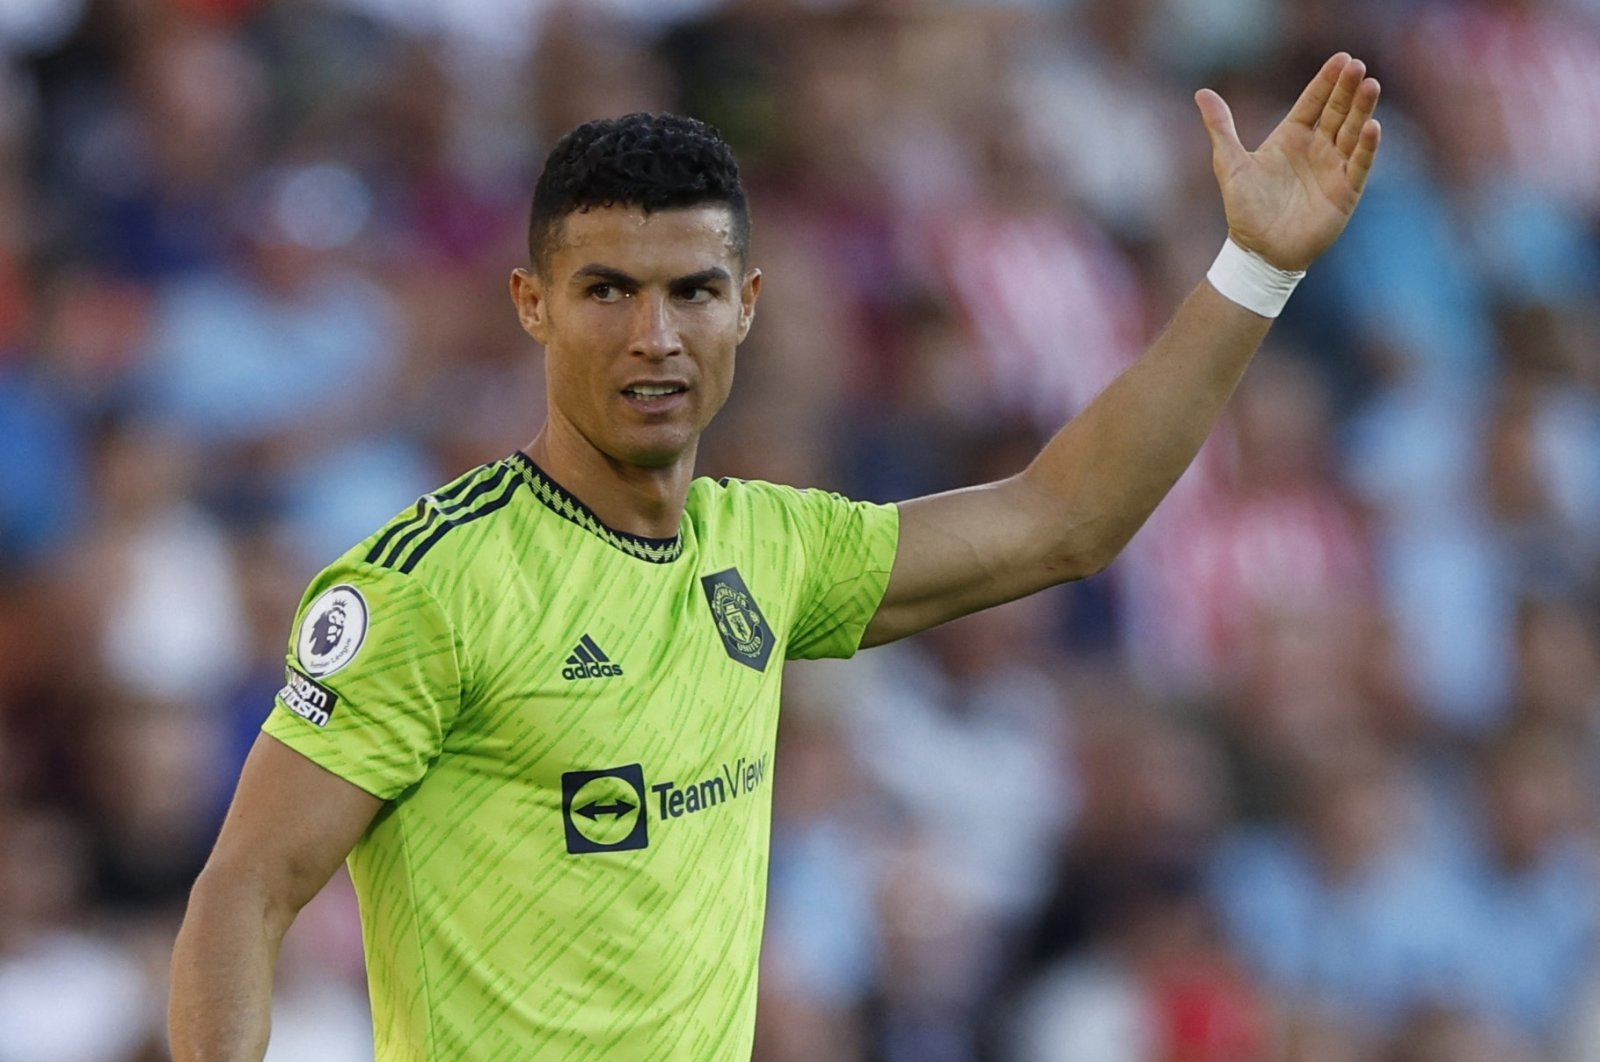 Manchester United&#039;s Cristiano Ronaldo reacts during a Premier League match against Brentford, London, England, Aug. 13, 2022. (Reuters Photo)